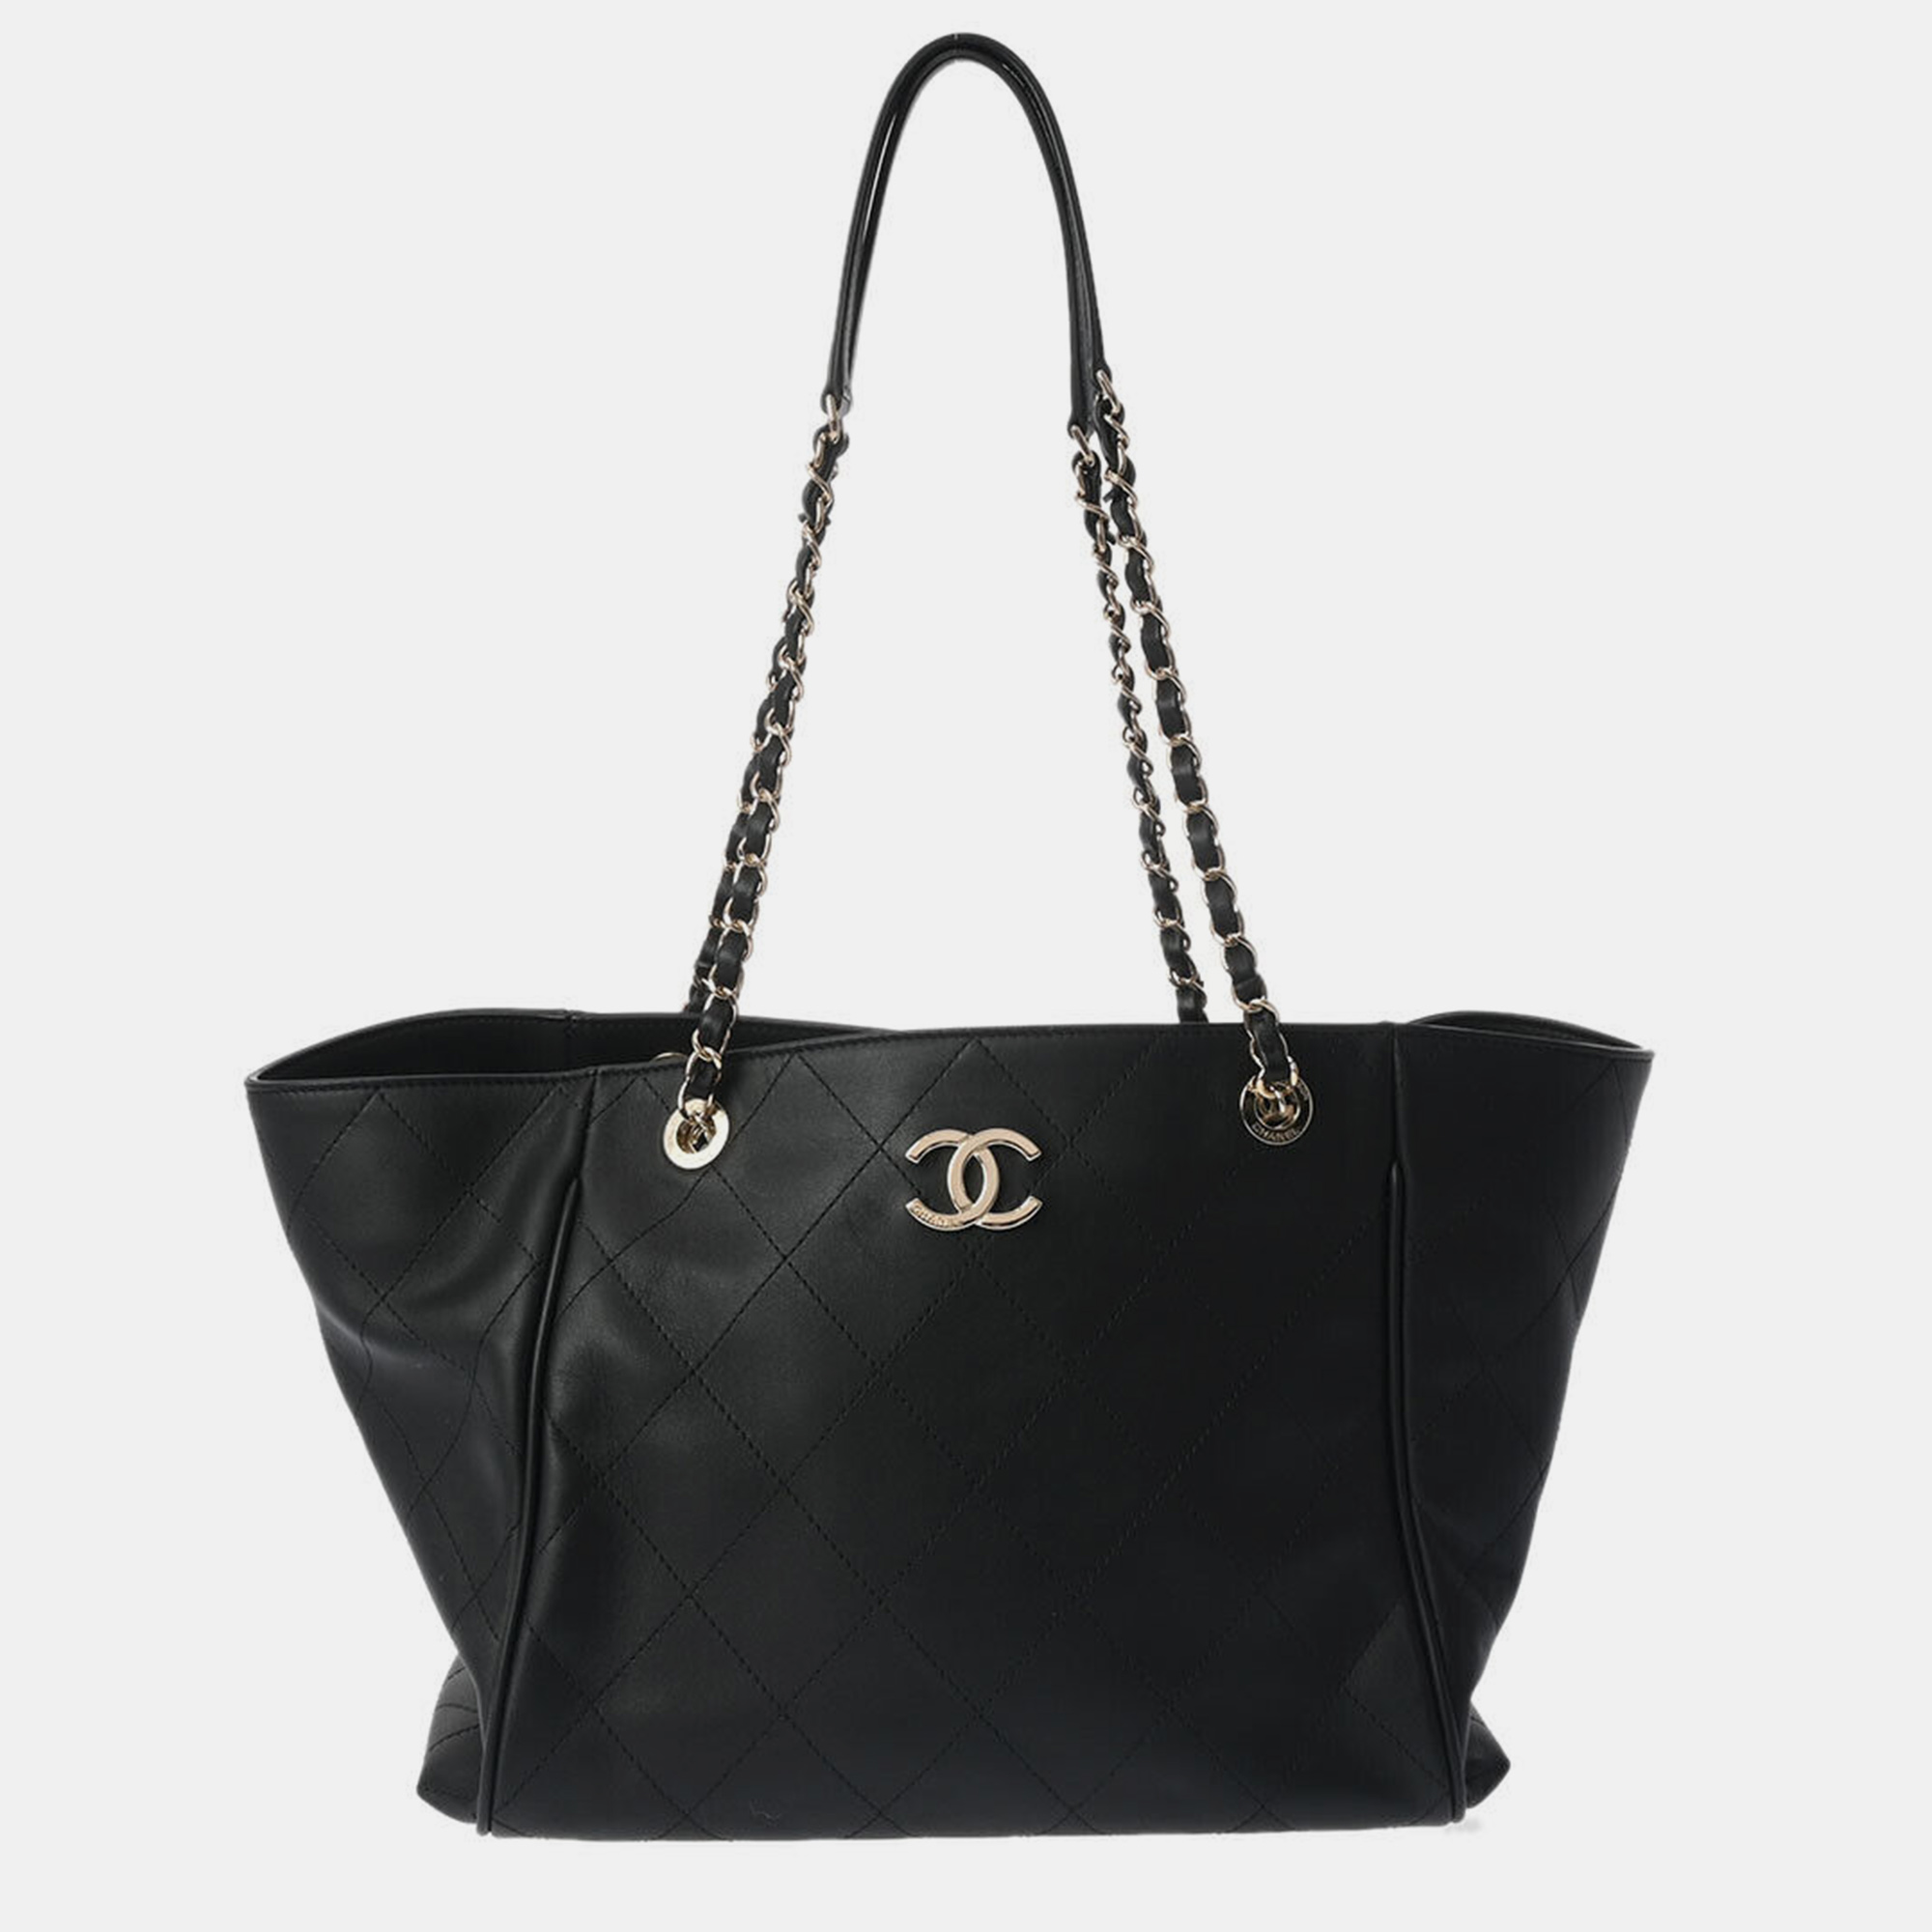 

Chanel Black Leather CC Tote Bag